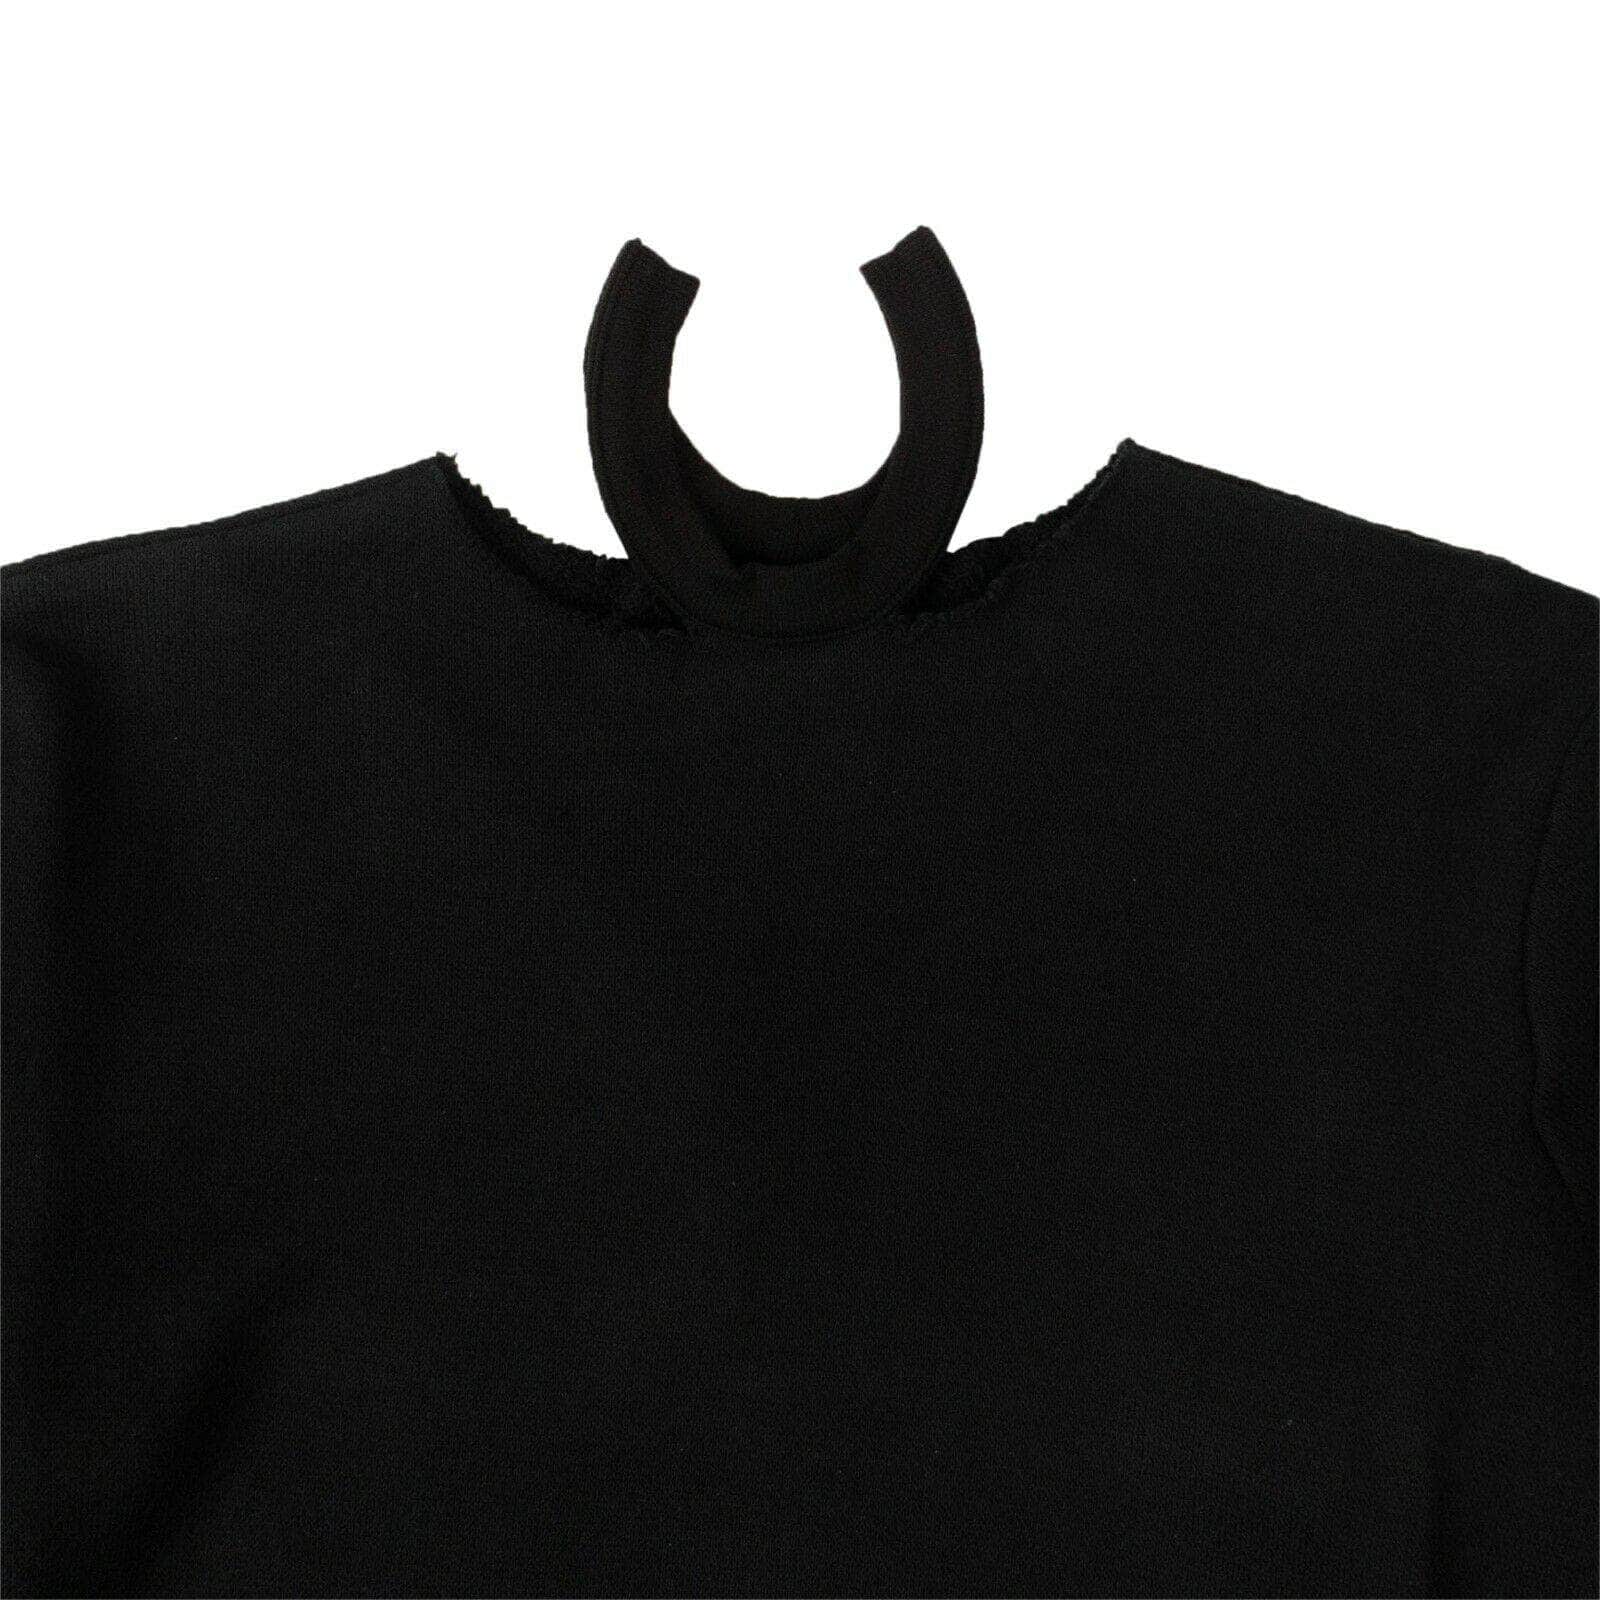 Unravel Project channelenable-all, chicmi, couponcollection, gender-womens, main-clothing, size-xxs, under-250, unravel-project, womens-crewneck-sweaters XXS Black Loose Fit Cut Out Sweater 82NGG-UN-1078/XXS 82NGG-UN-1078/XXS